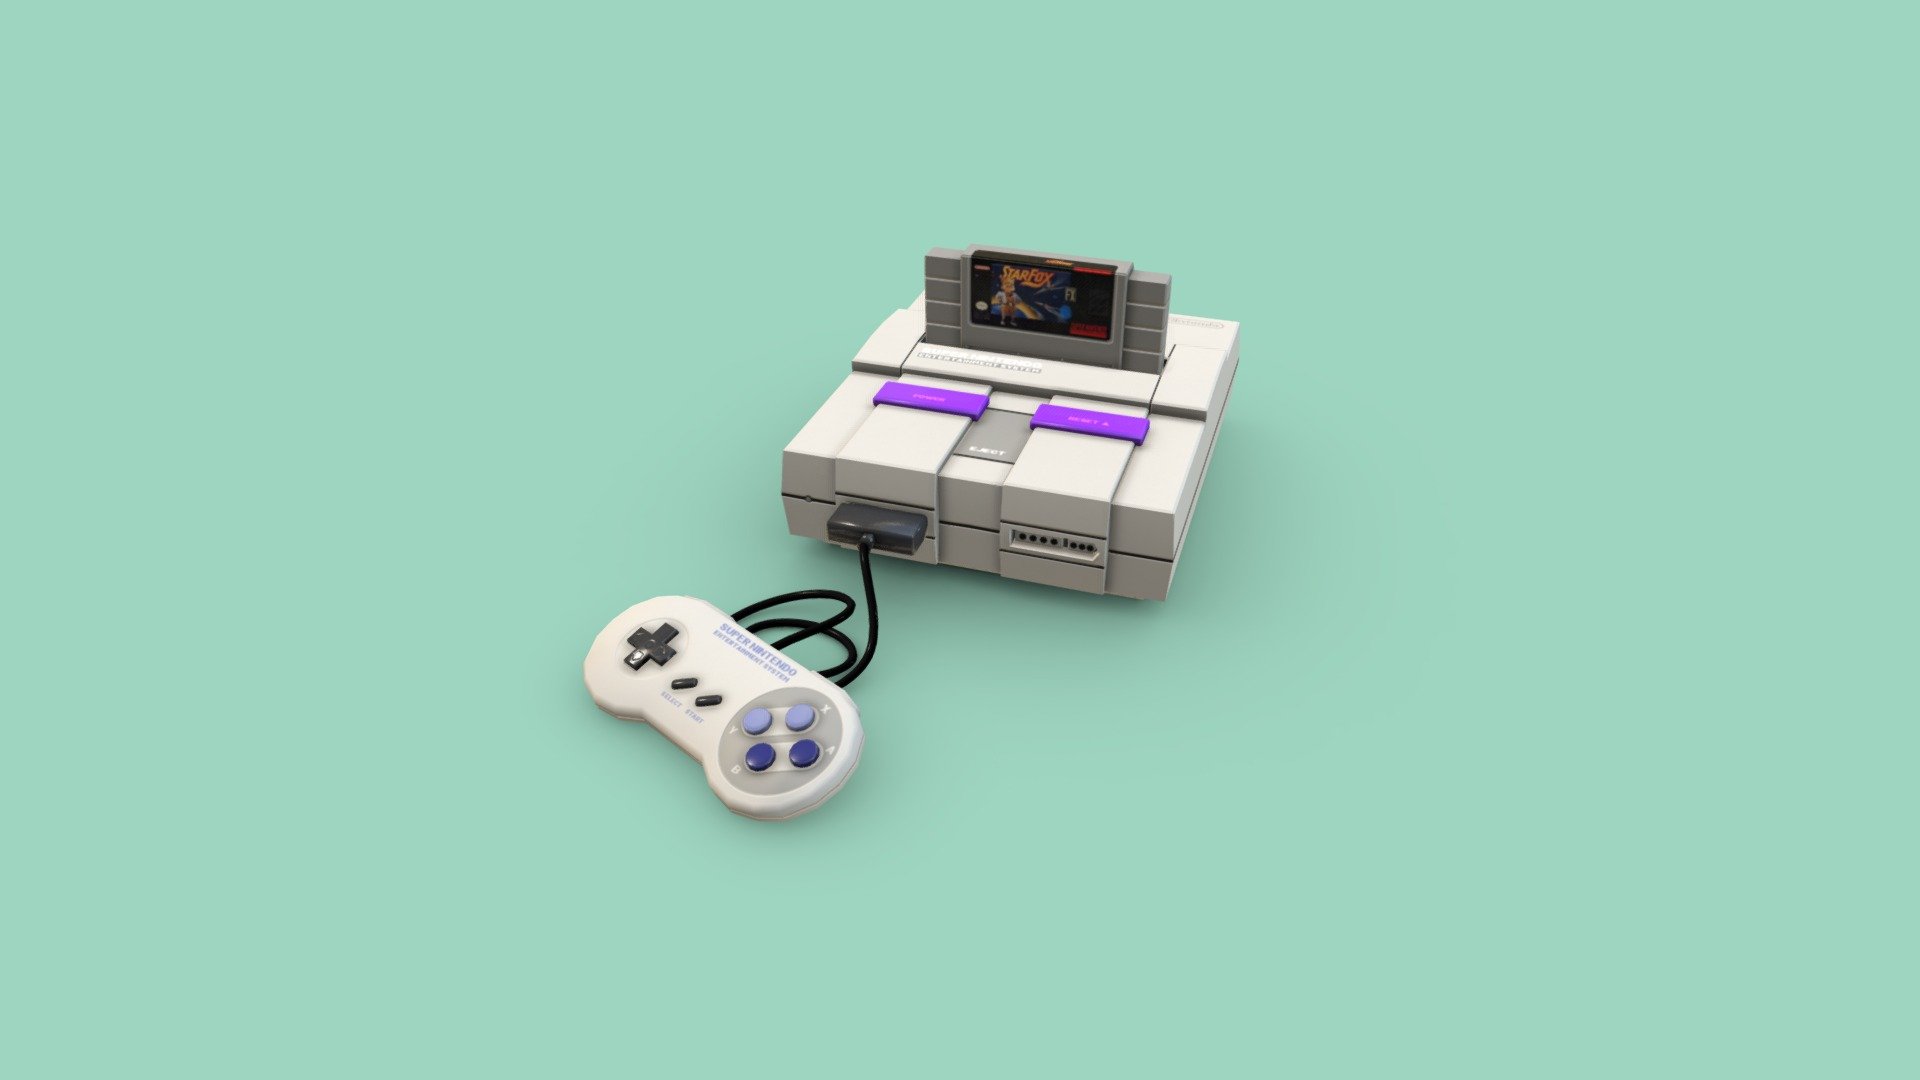 SNES made for SFM. http://steamcommunity.com/sharedfiles/filedetails/?id=734304115 - Super Nintendo Entertainment System - 3D model by Unconid 3d model